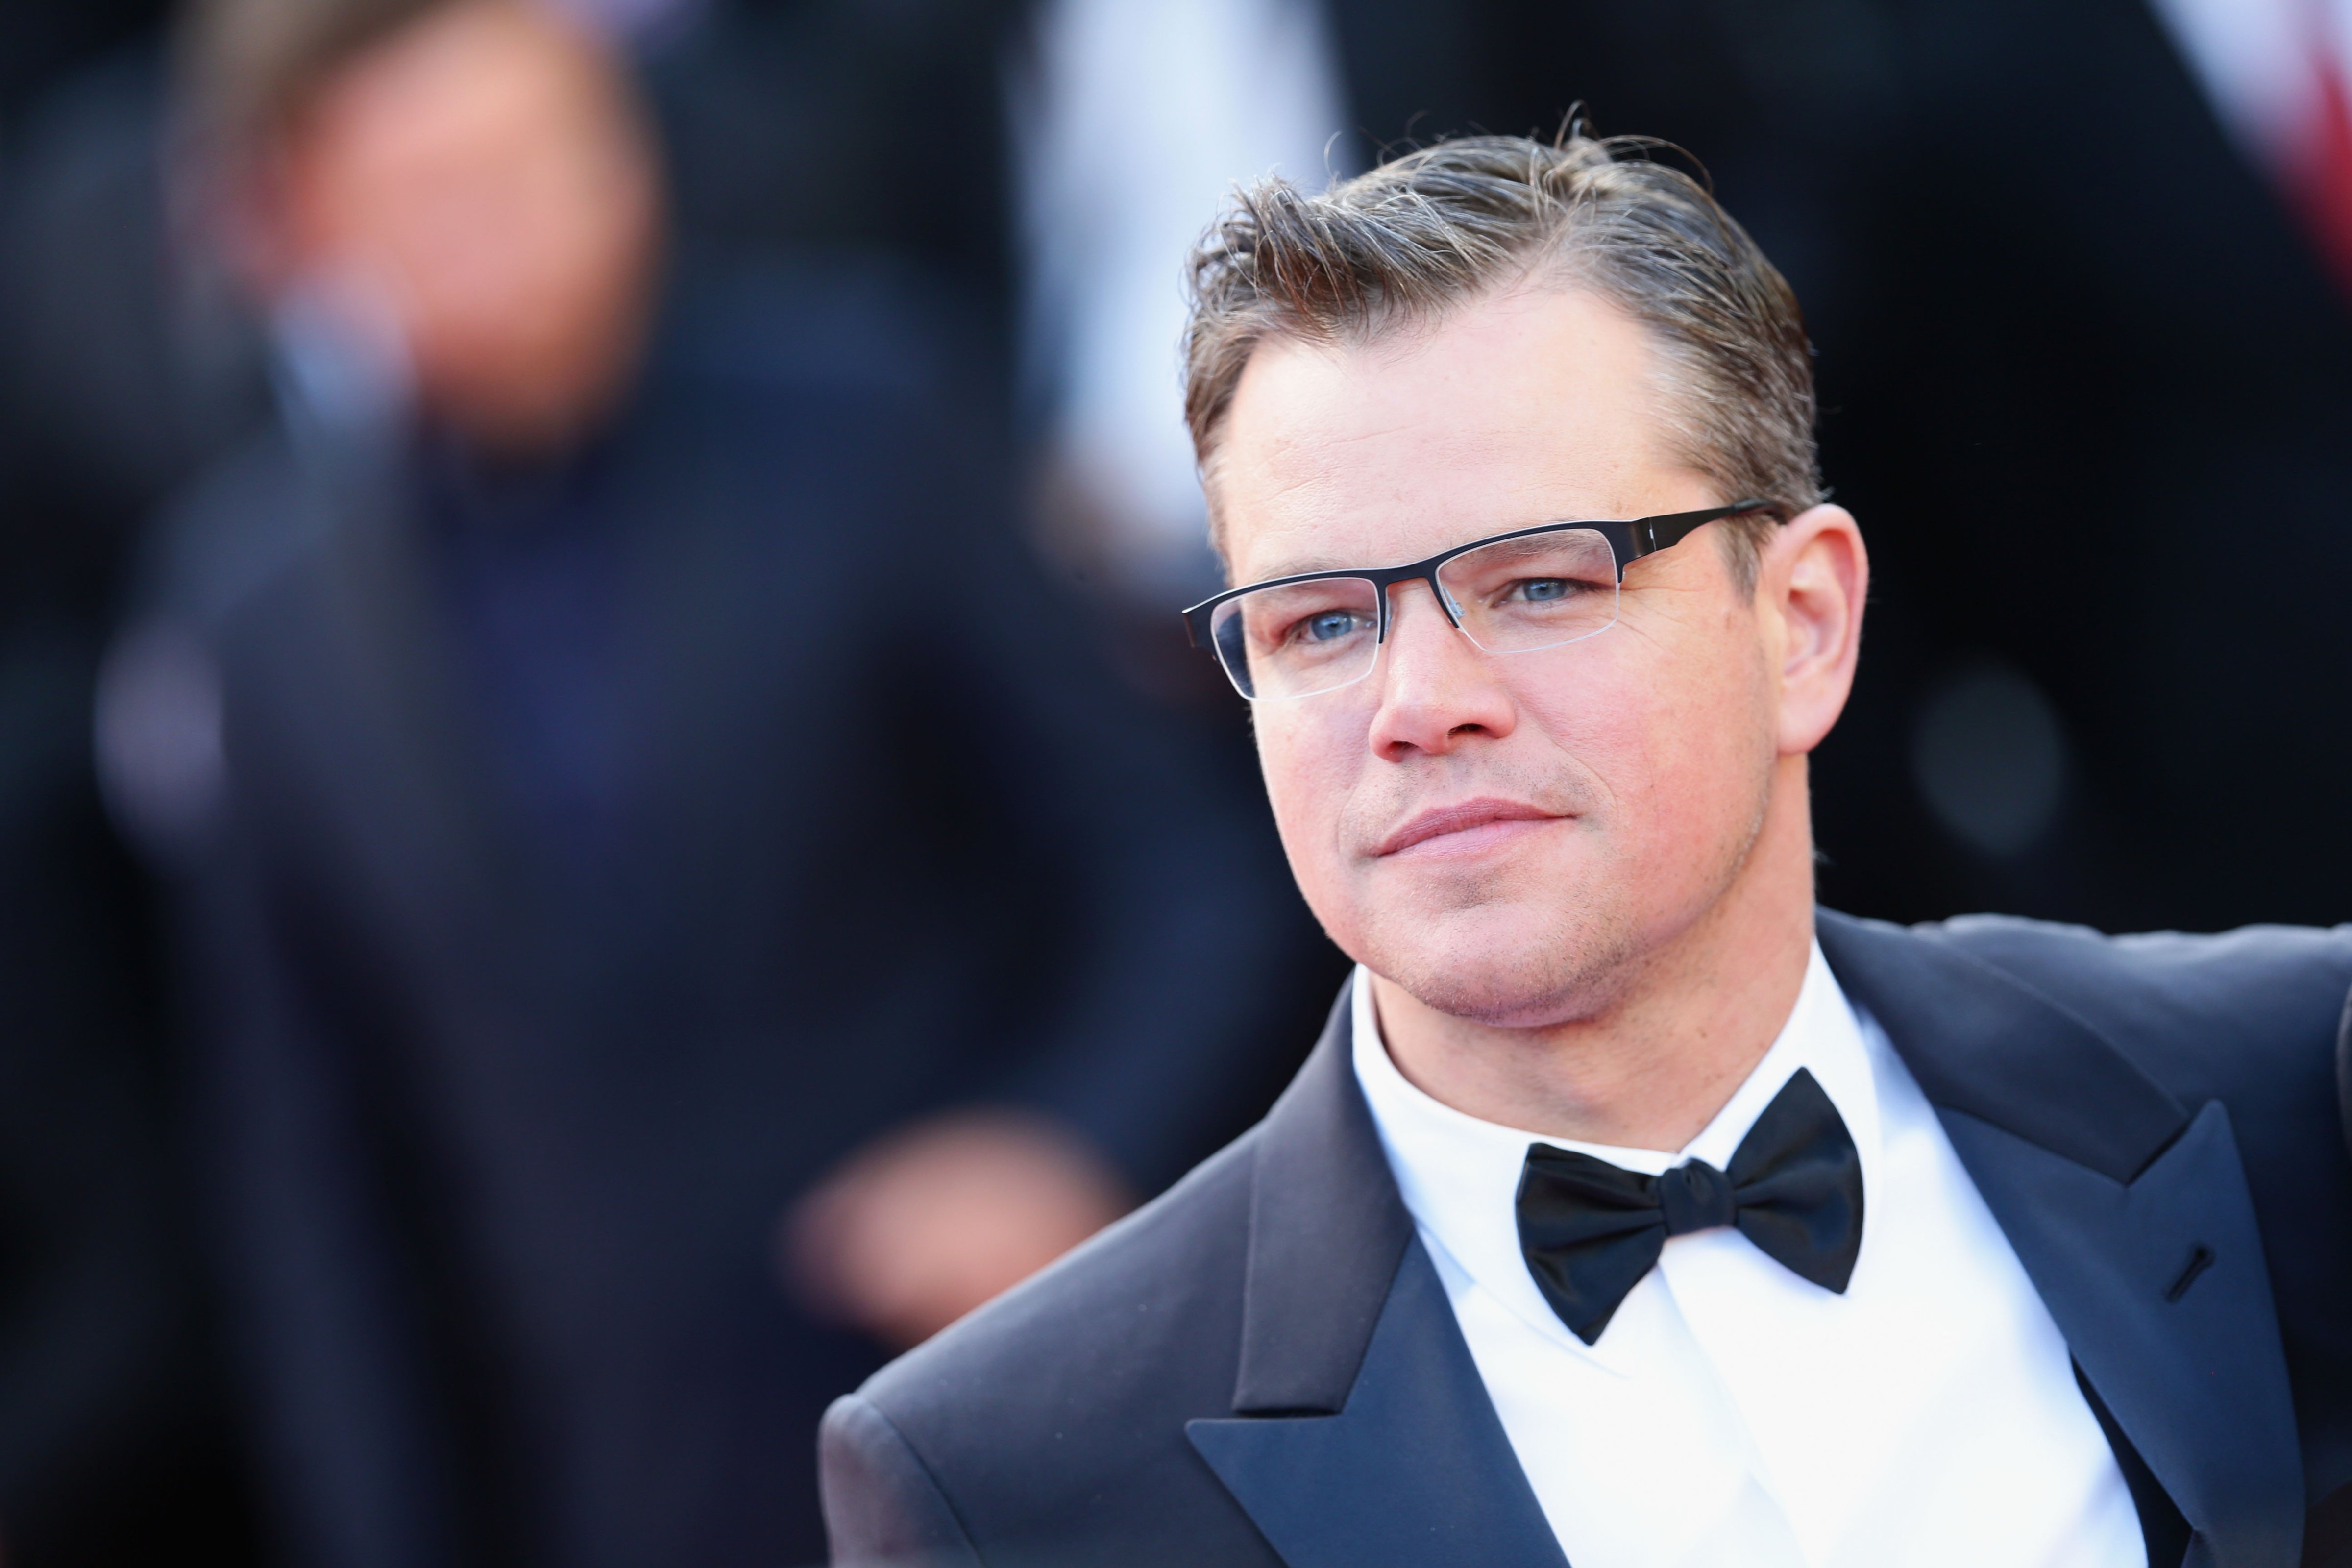 Actor Matt Damon attends the 'Behind The Candelabra' premiere during The 66th Annual Cannes Film Festival at Theatre Lumiere on May 21, 2013 in Cannes, France. (Vittorio Zunino Celotto—Getty Images)